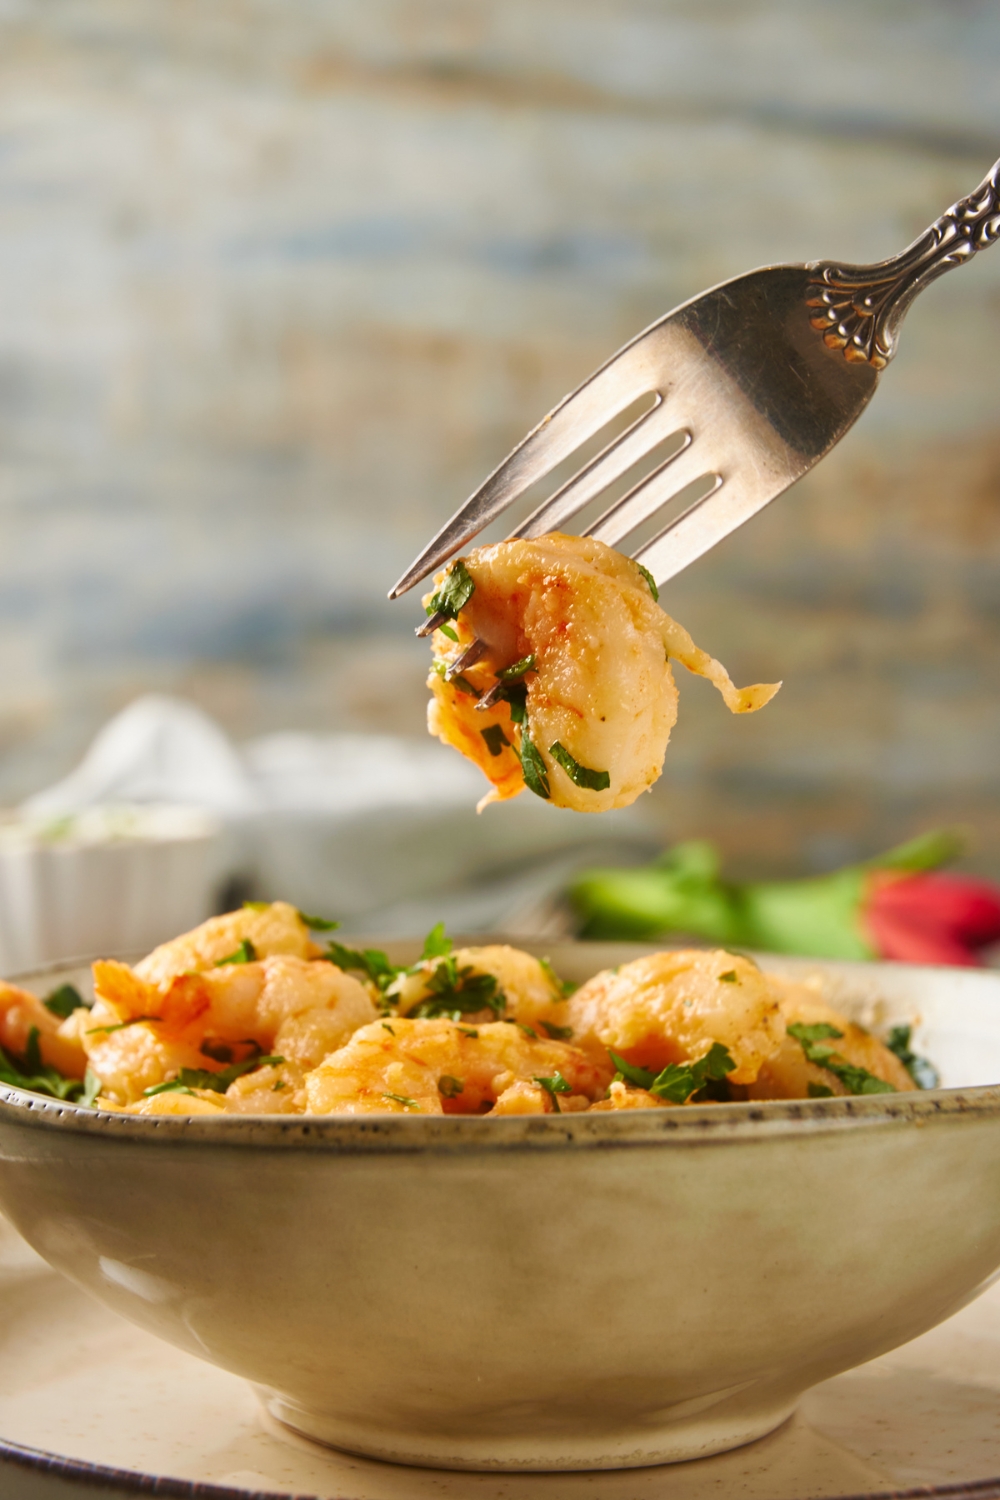 A fork holding a piece of cooked shrimp with fresh green herbs on it. The rest of the shrimp is in a bowl in the background.